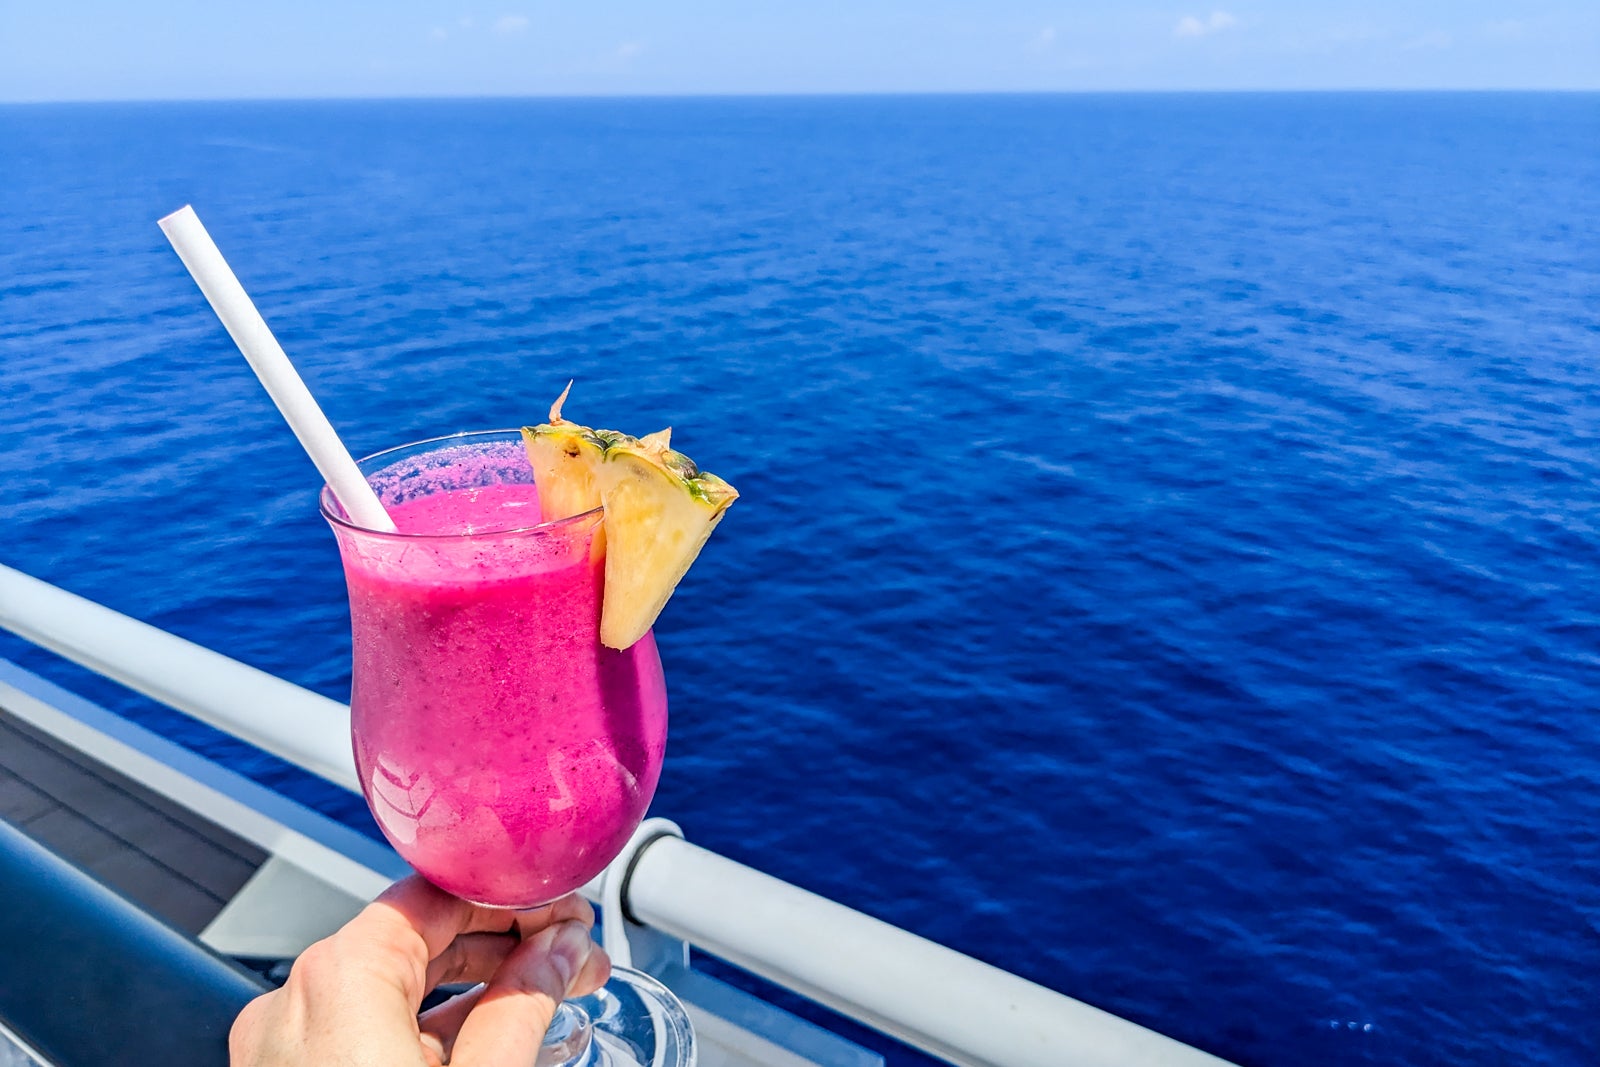 Bright magenta smoothie by cruise ship railing overlooking the ocean